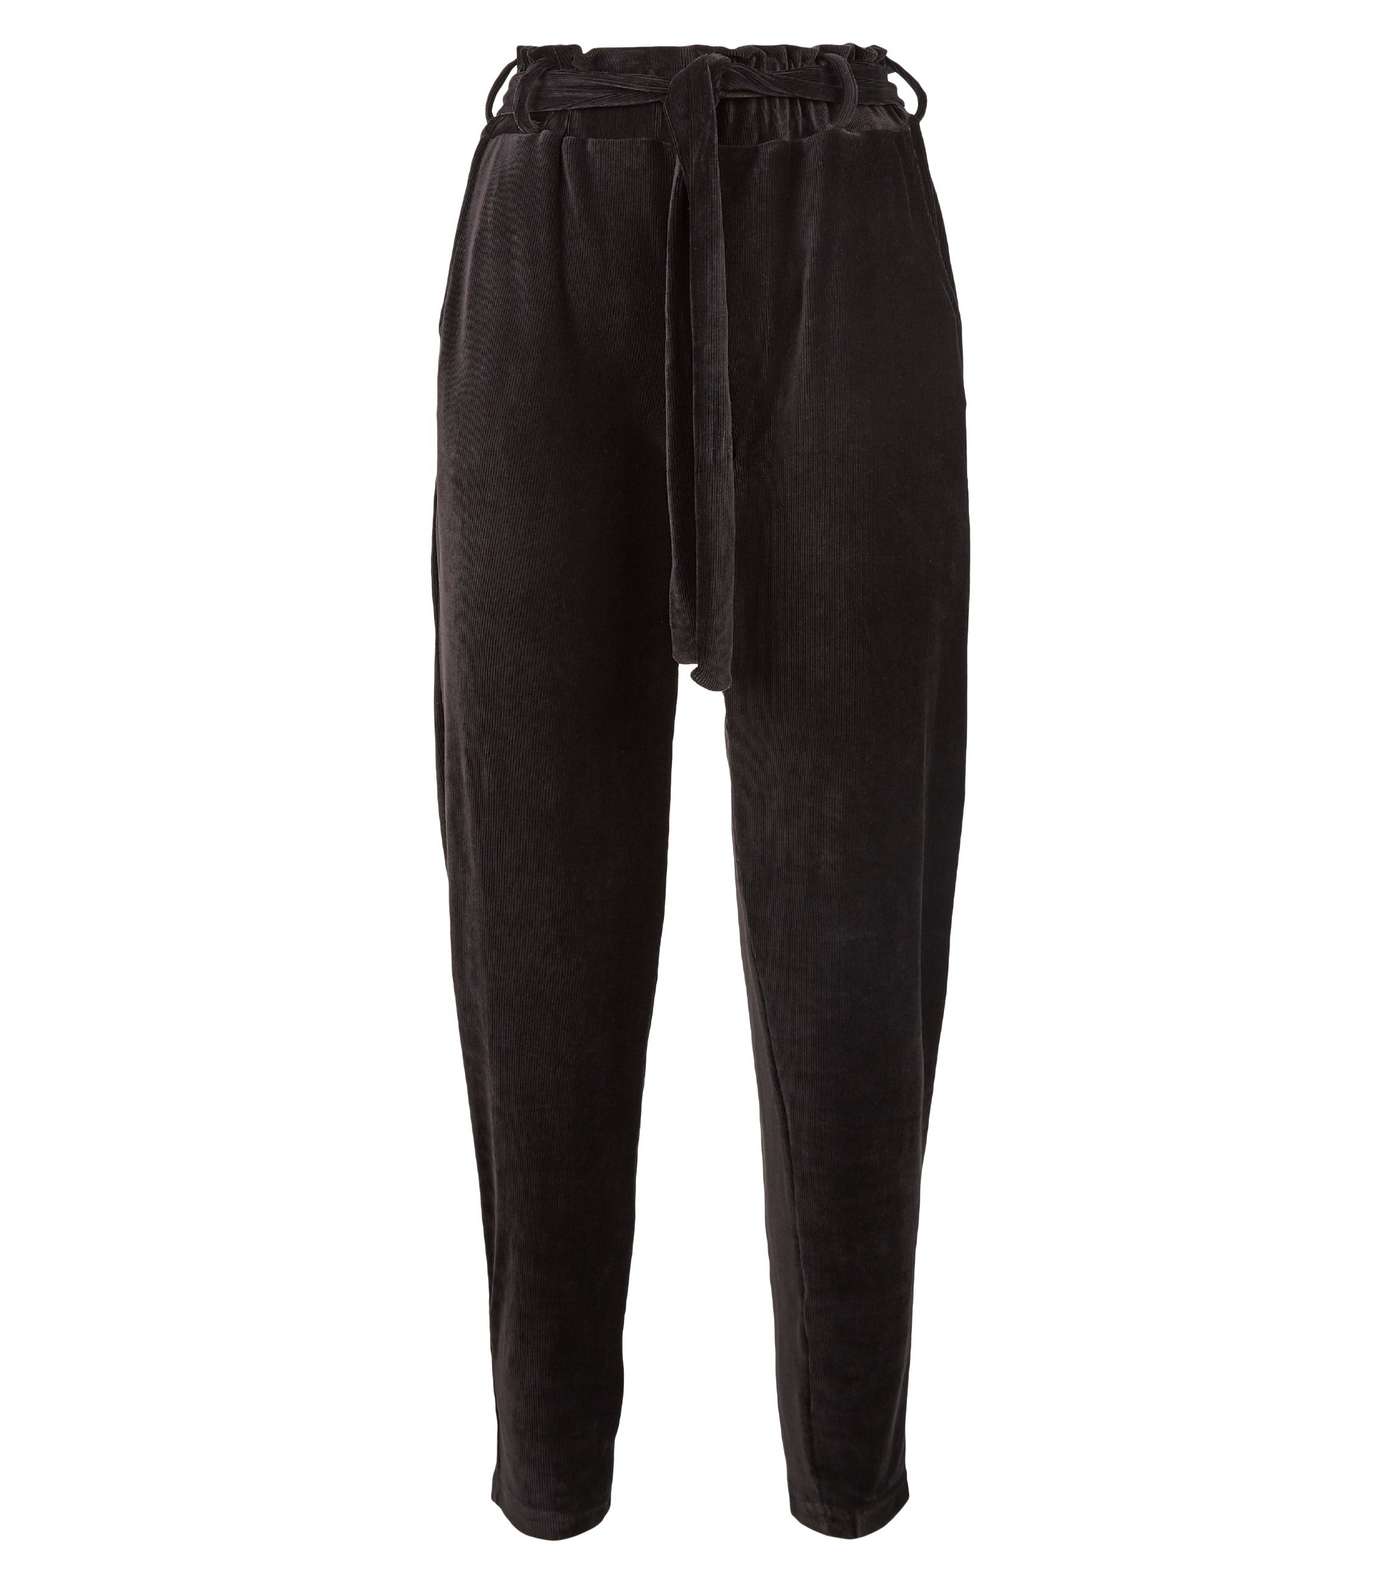 Blue Vanilla Black Corduroy Soft Touch Trousers Image 4